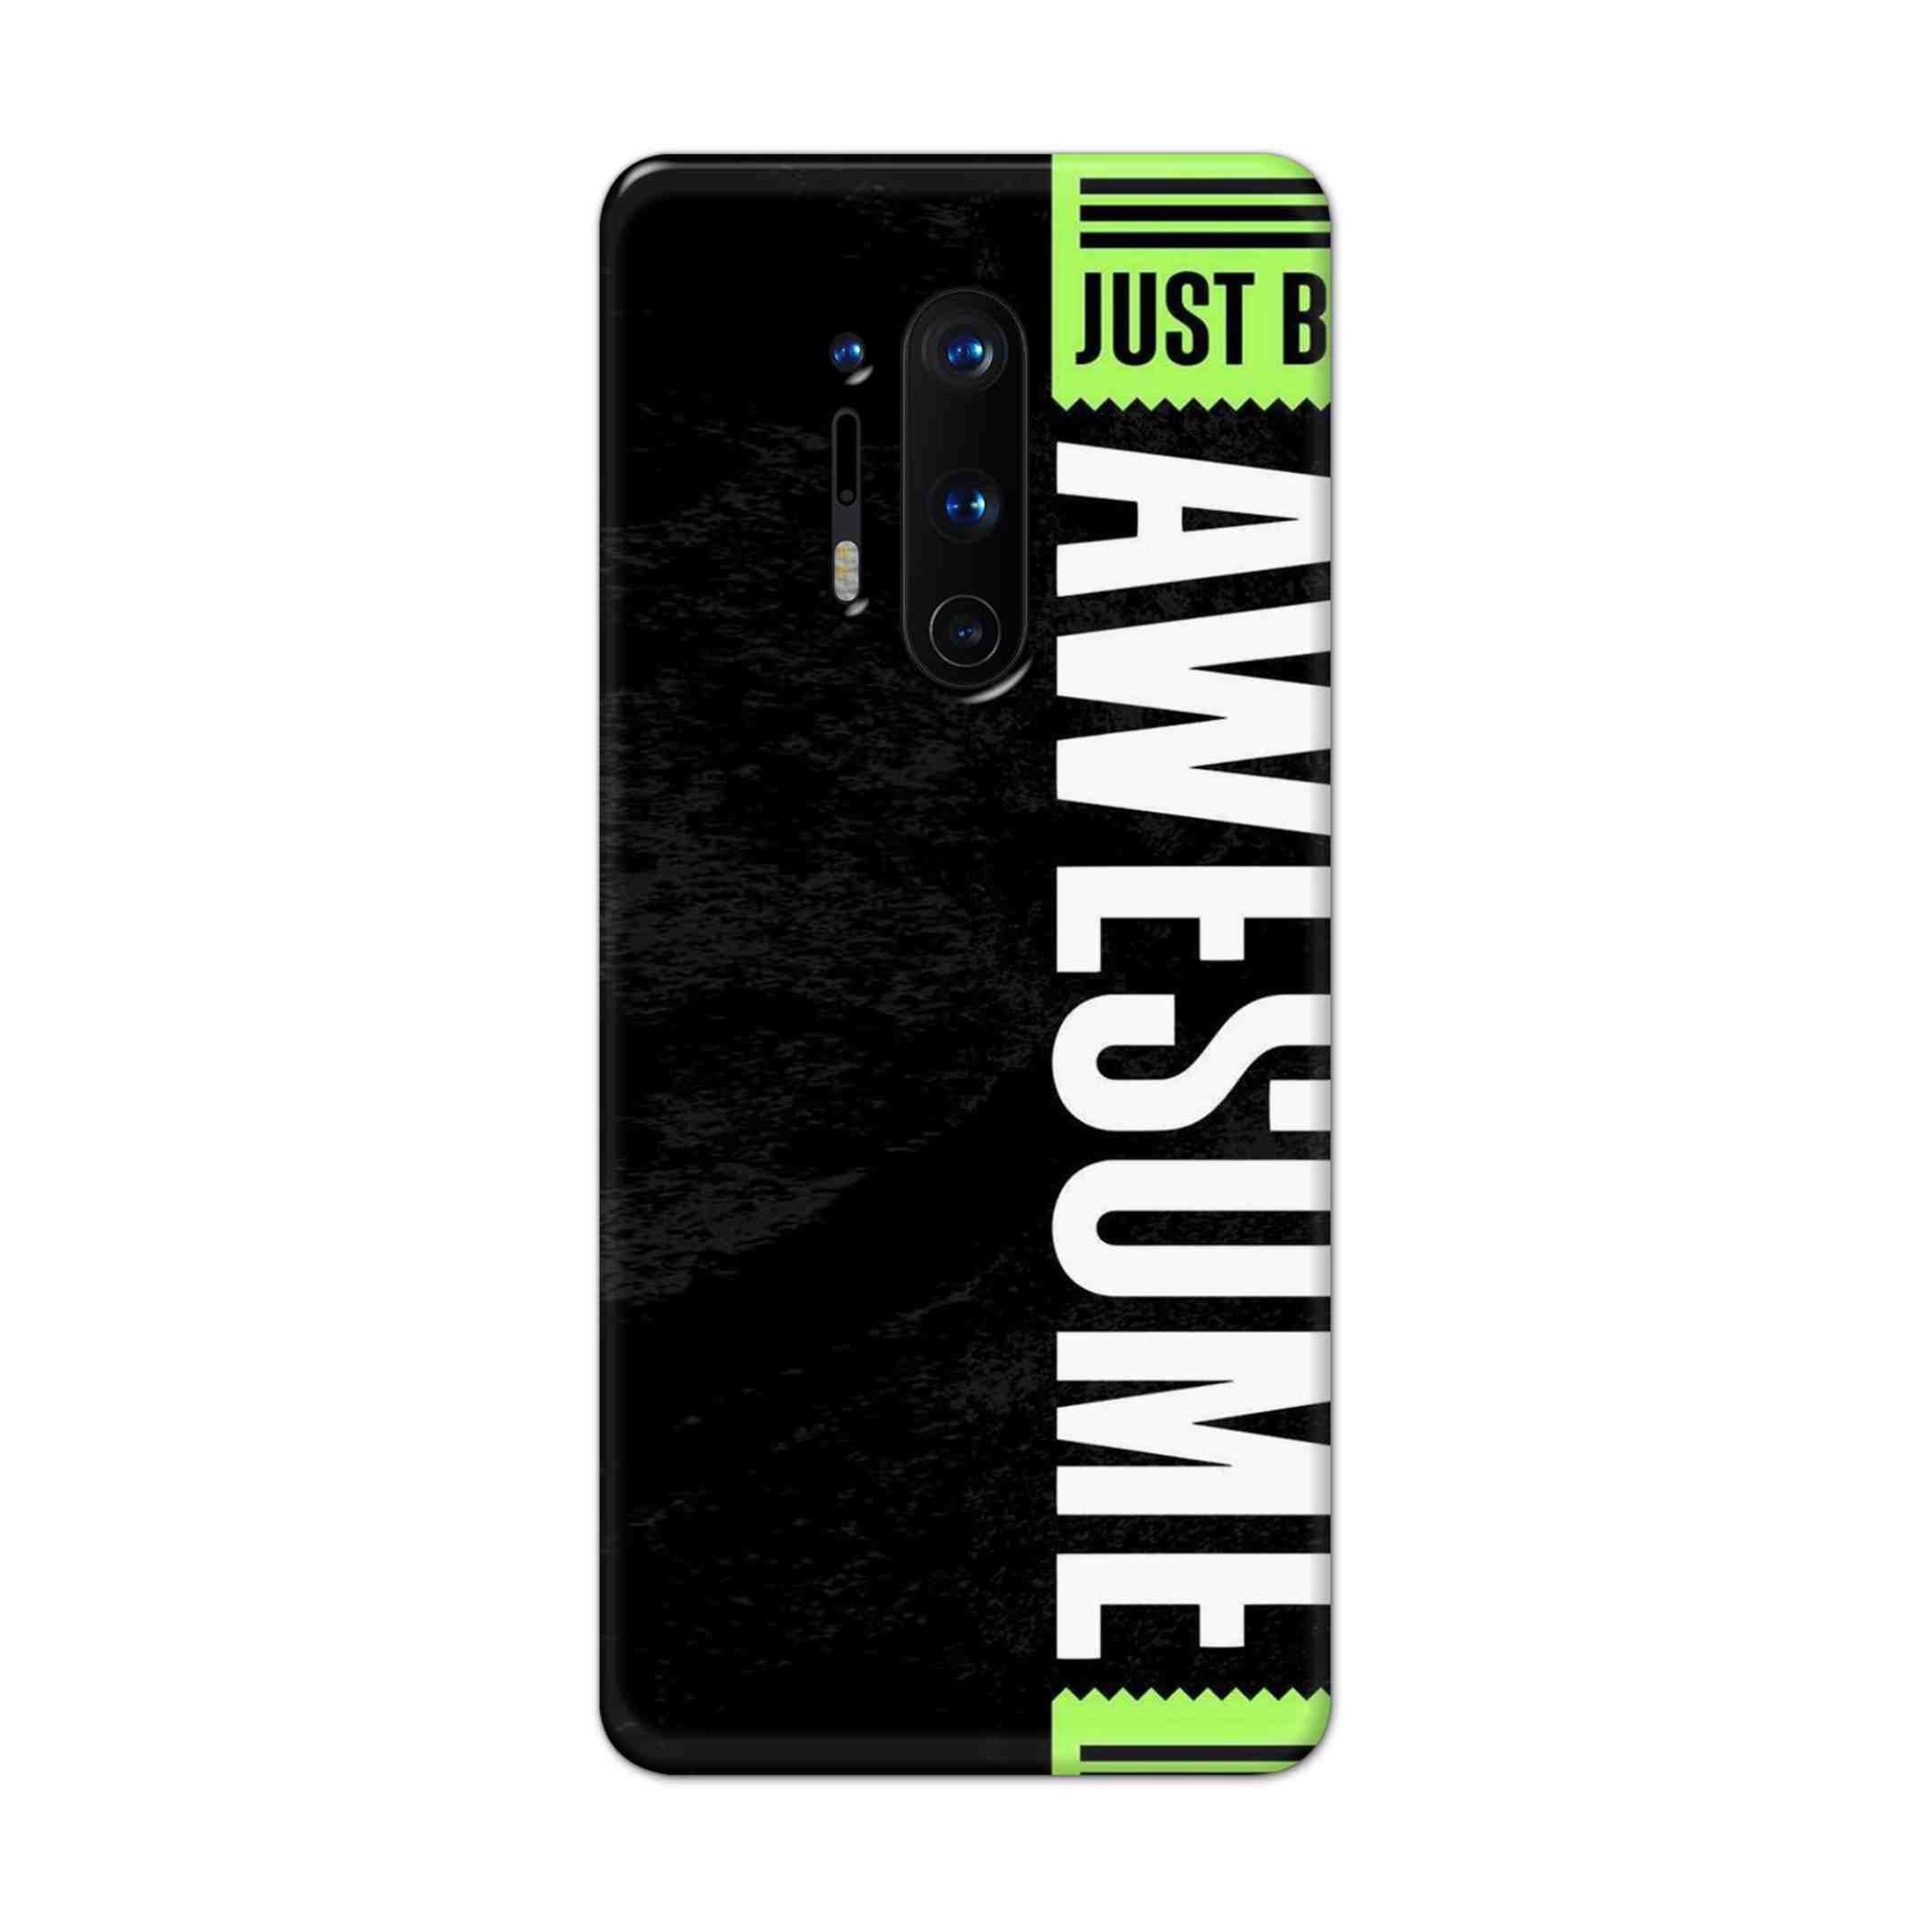 Buy Awesome Street Hard Back Mobile Phone Case Cover For OnePlus 8 Pro Online